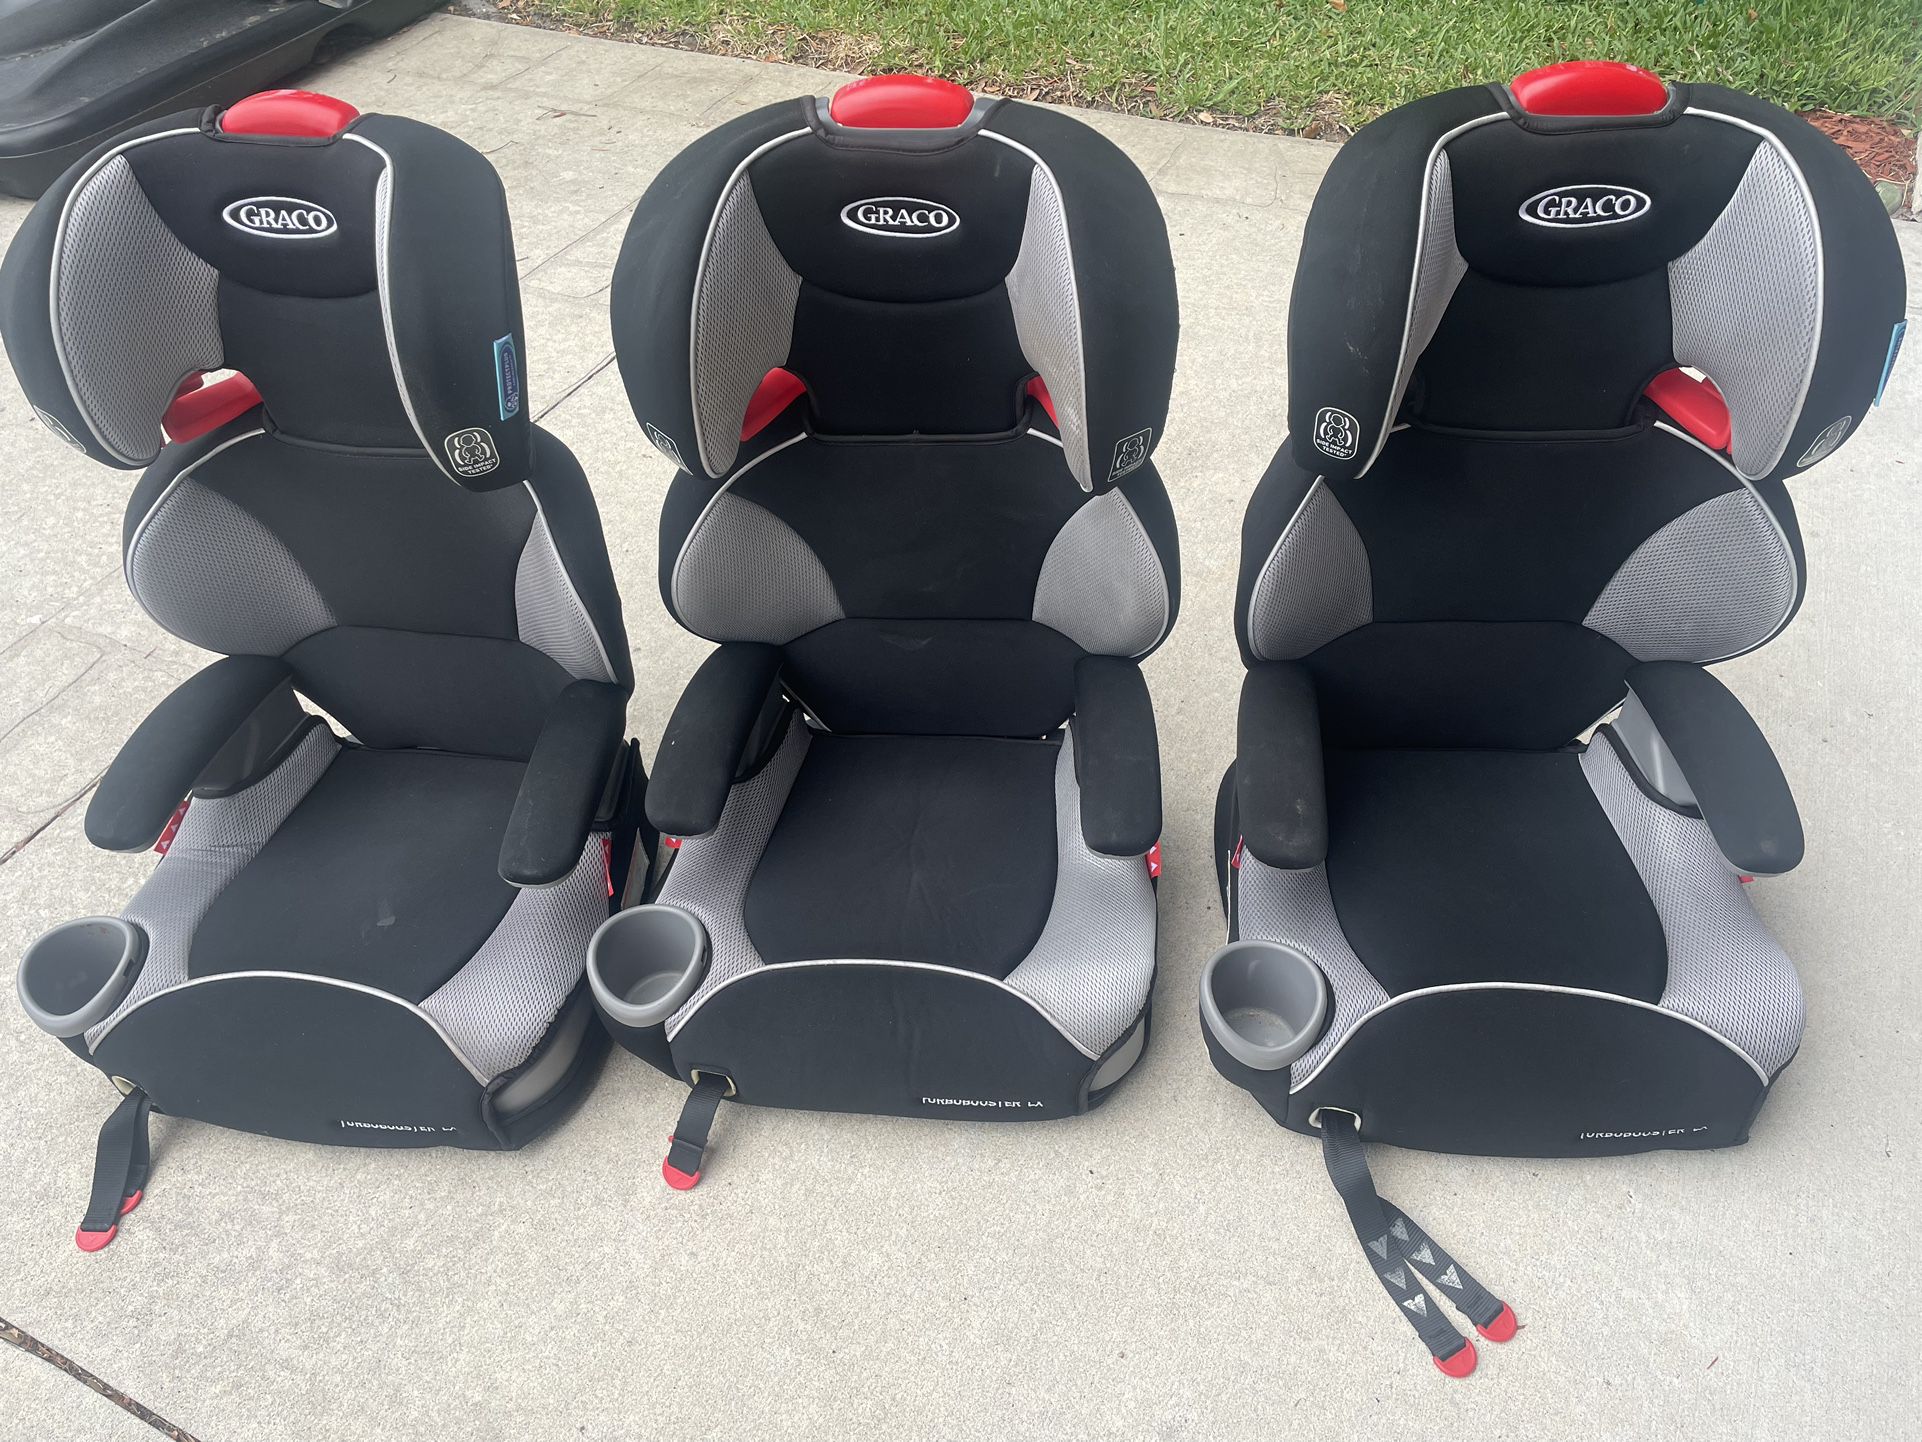 Three Child Car Seats (or 1 For $45)